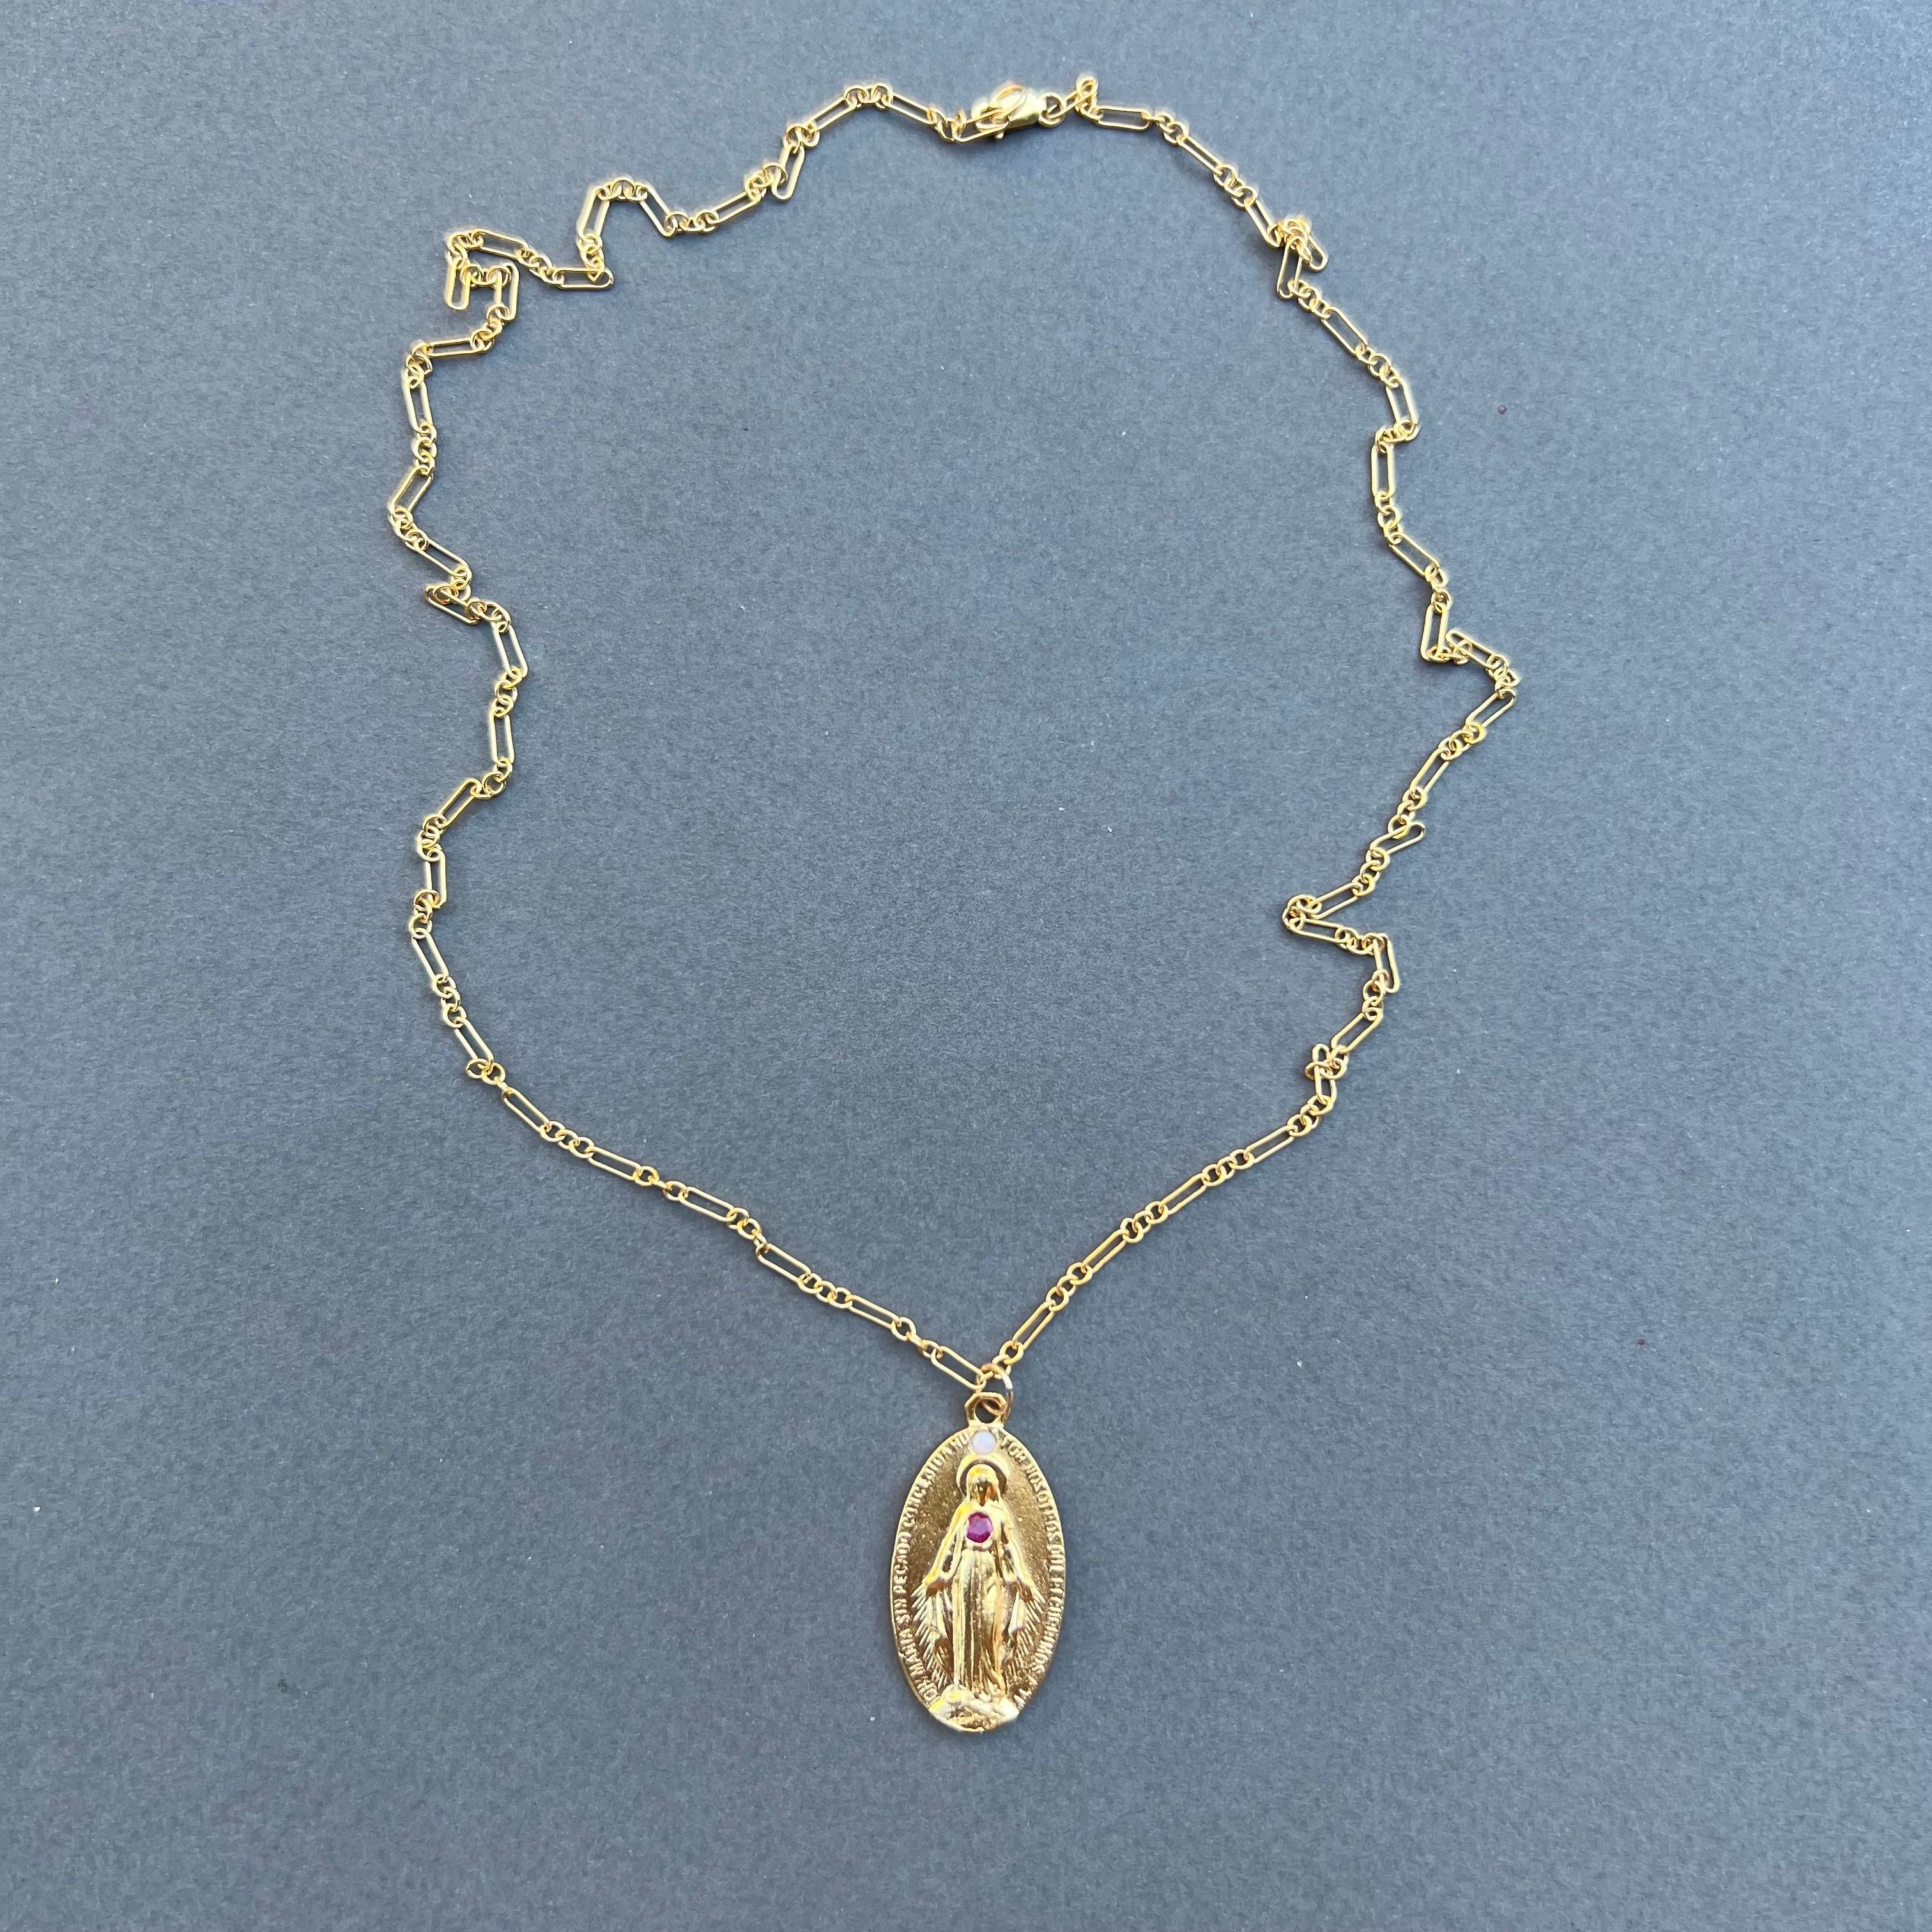 Virgin Mary Ruby Opal Medal Chain Necklace J Dauphin For Sale 1